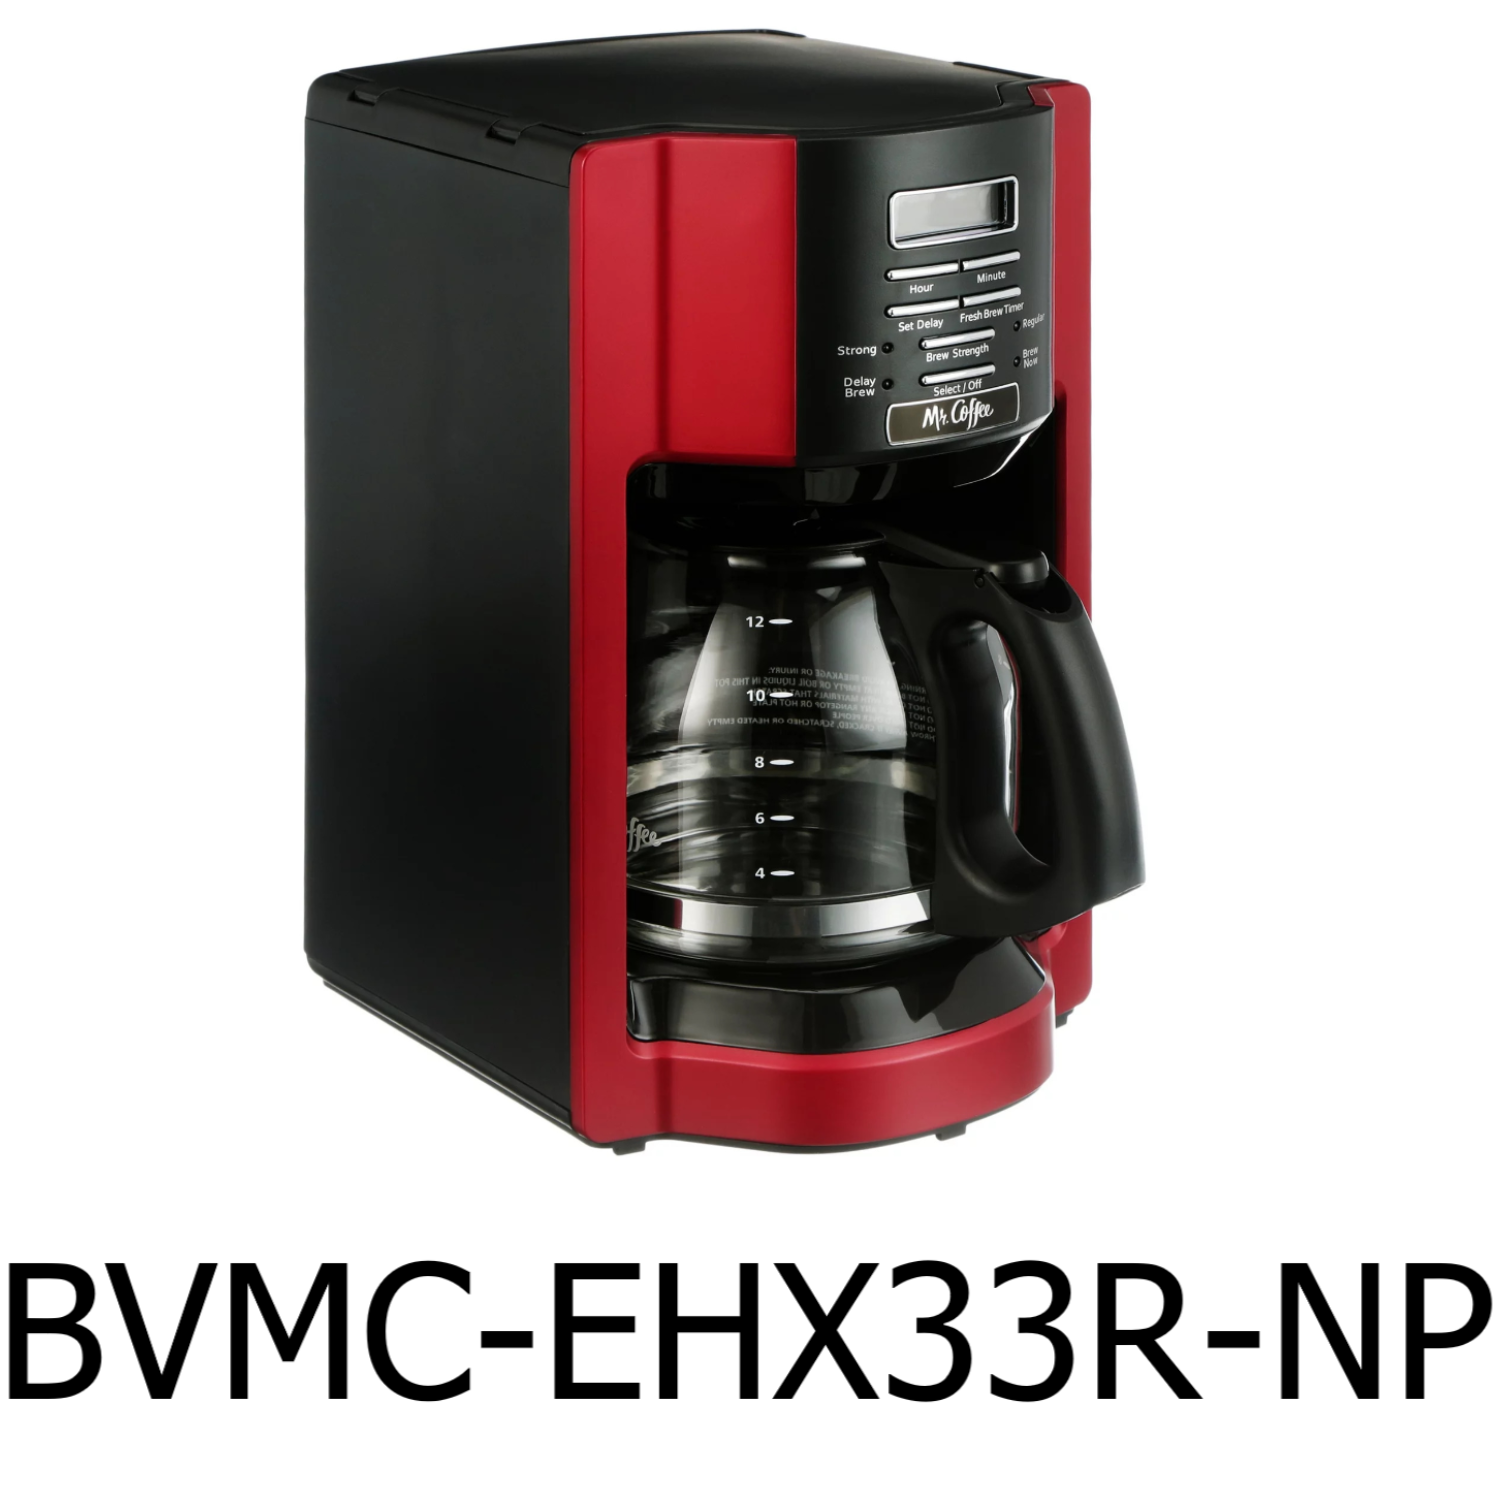 Mr. Coffee Coffee Maker, Programmable Coffee Machine with Auto Pause and  Glass Carafe, 5 Cups, Black